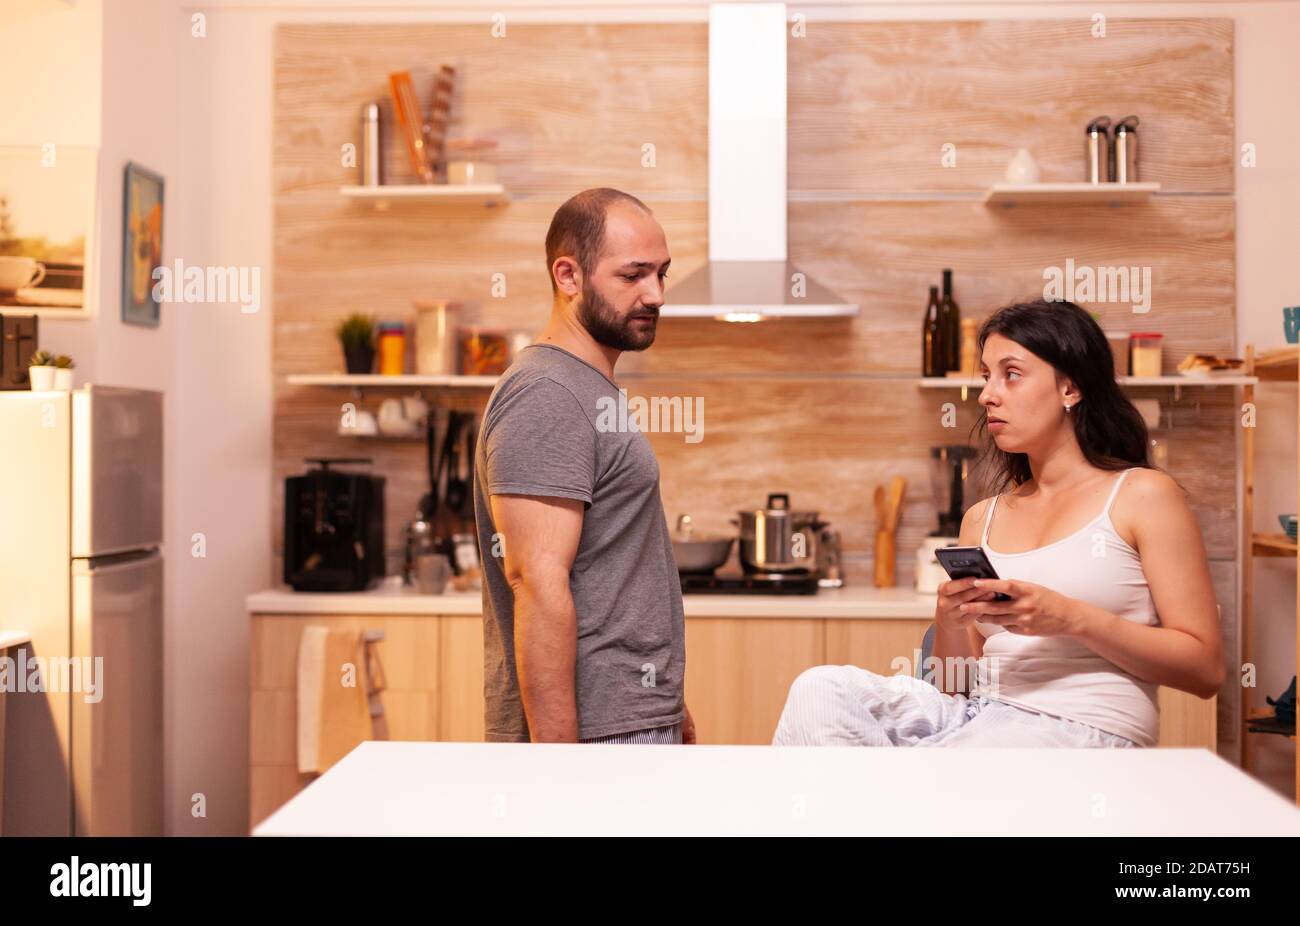 Husband suspecting wife of cheating with another man while she's texting. Frustrated offended irritated accusing woman of infidelity arguing her. Stock Photo